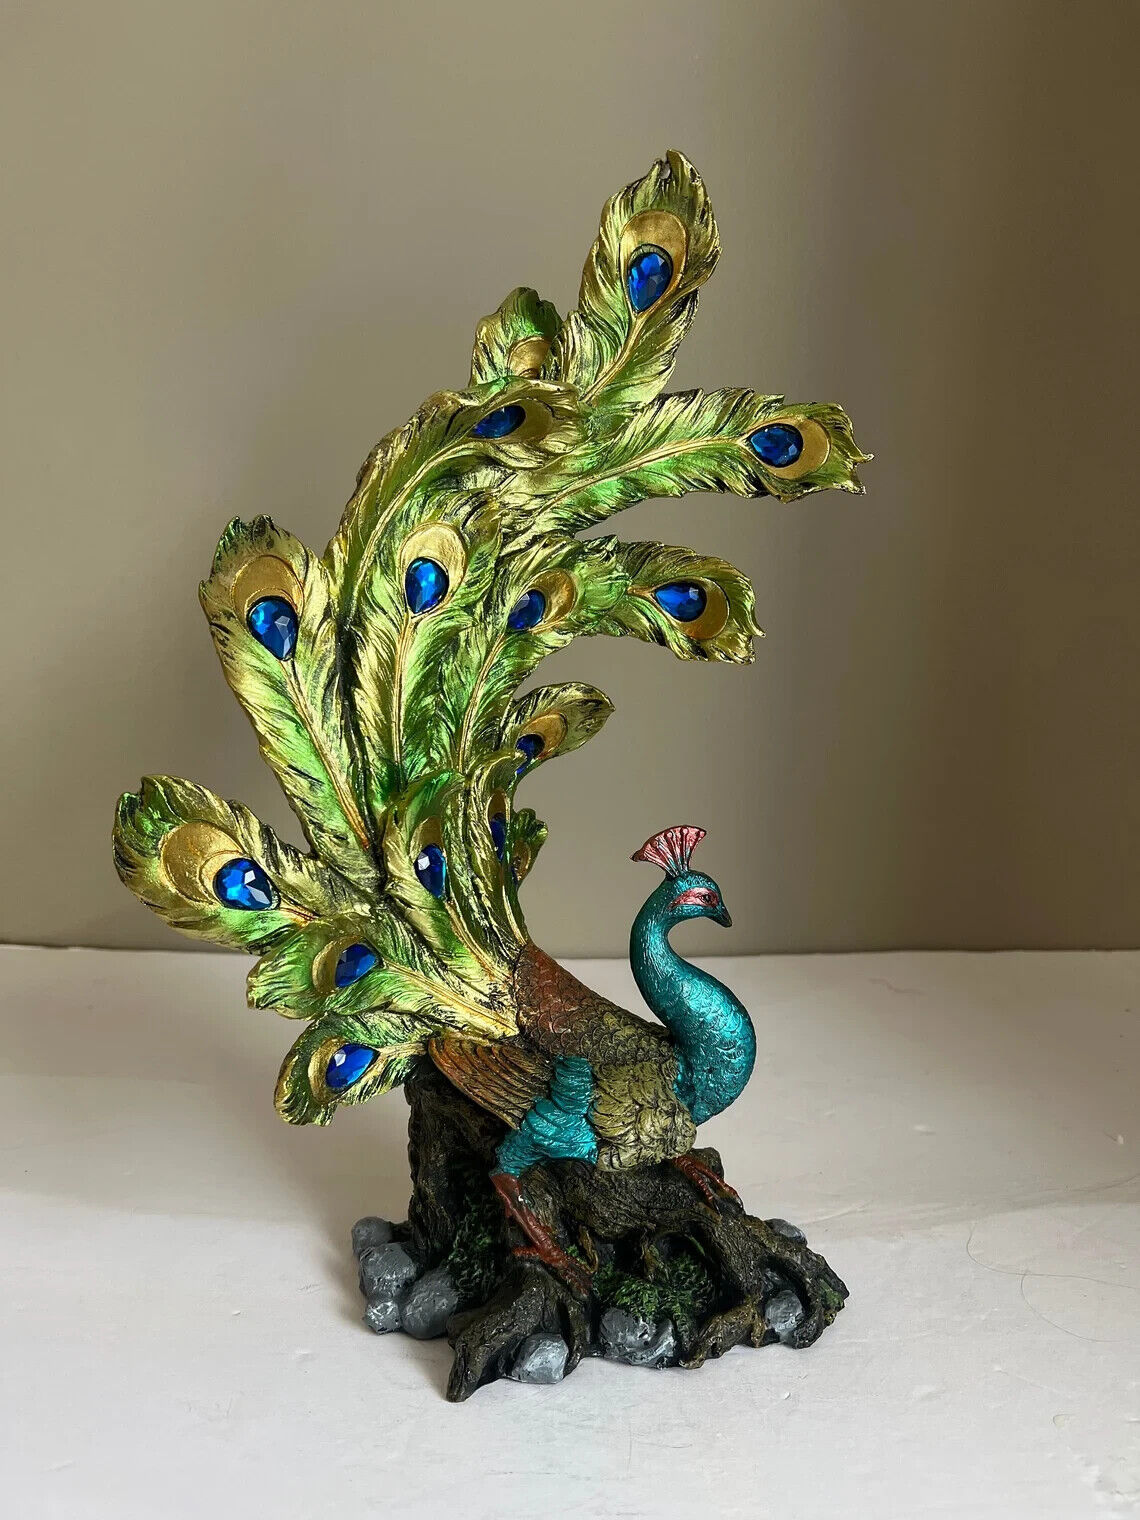 Peacock Figurine /Colorful Display/ Statue Bird Resin Feathers Crystals 14 in. T